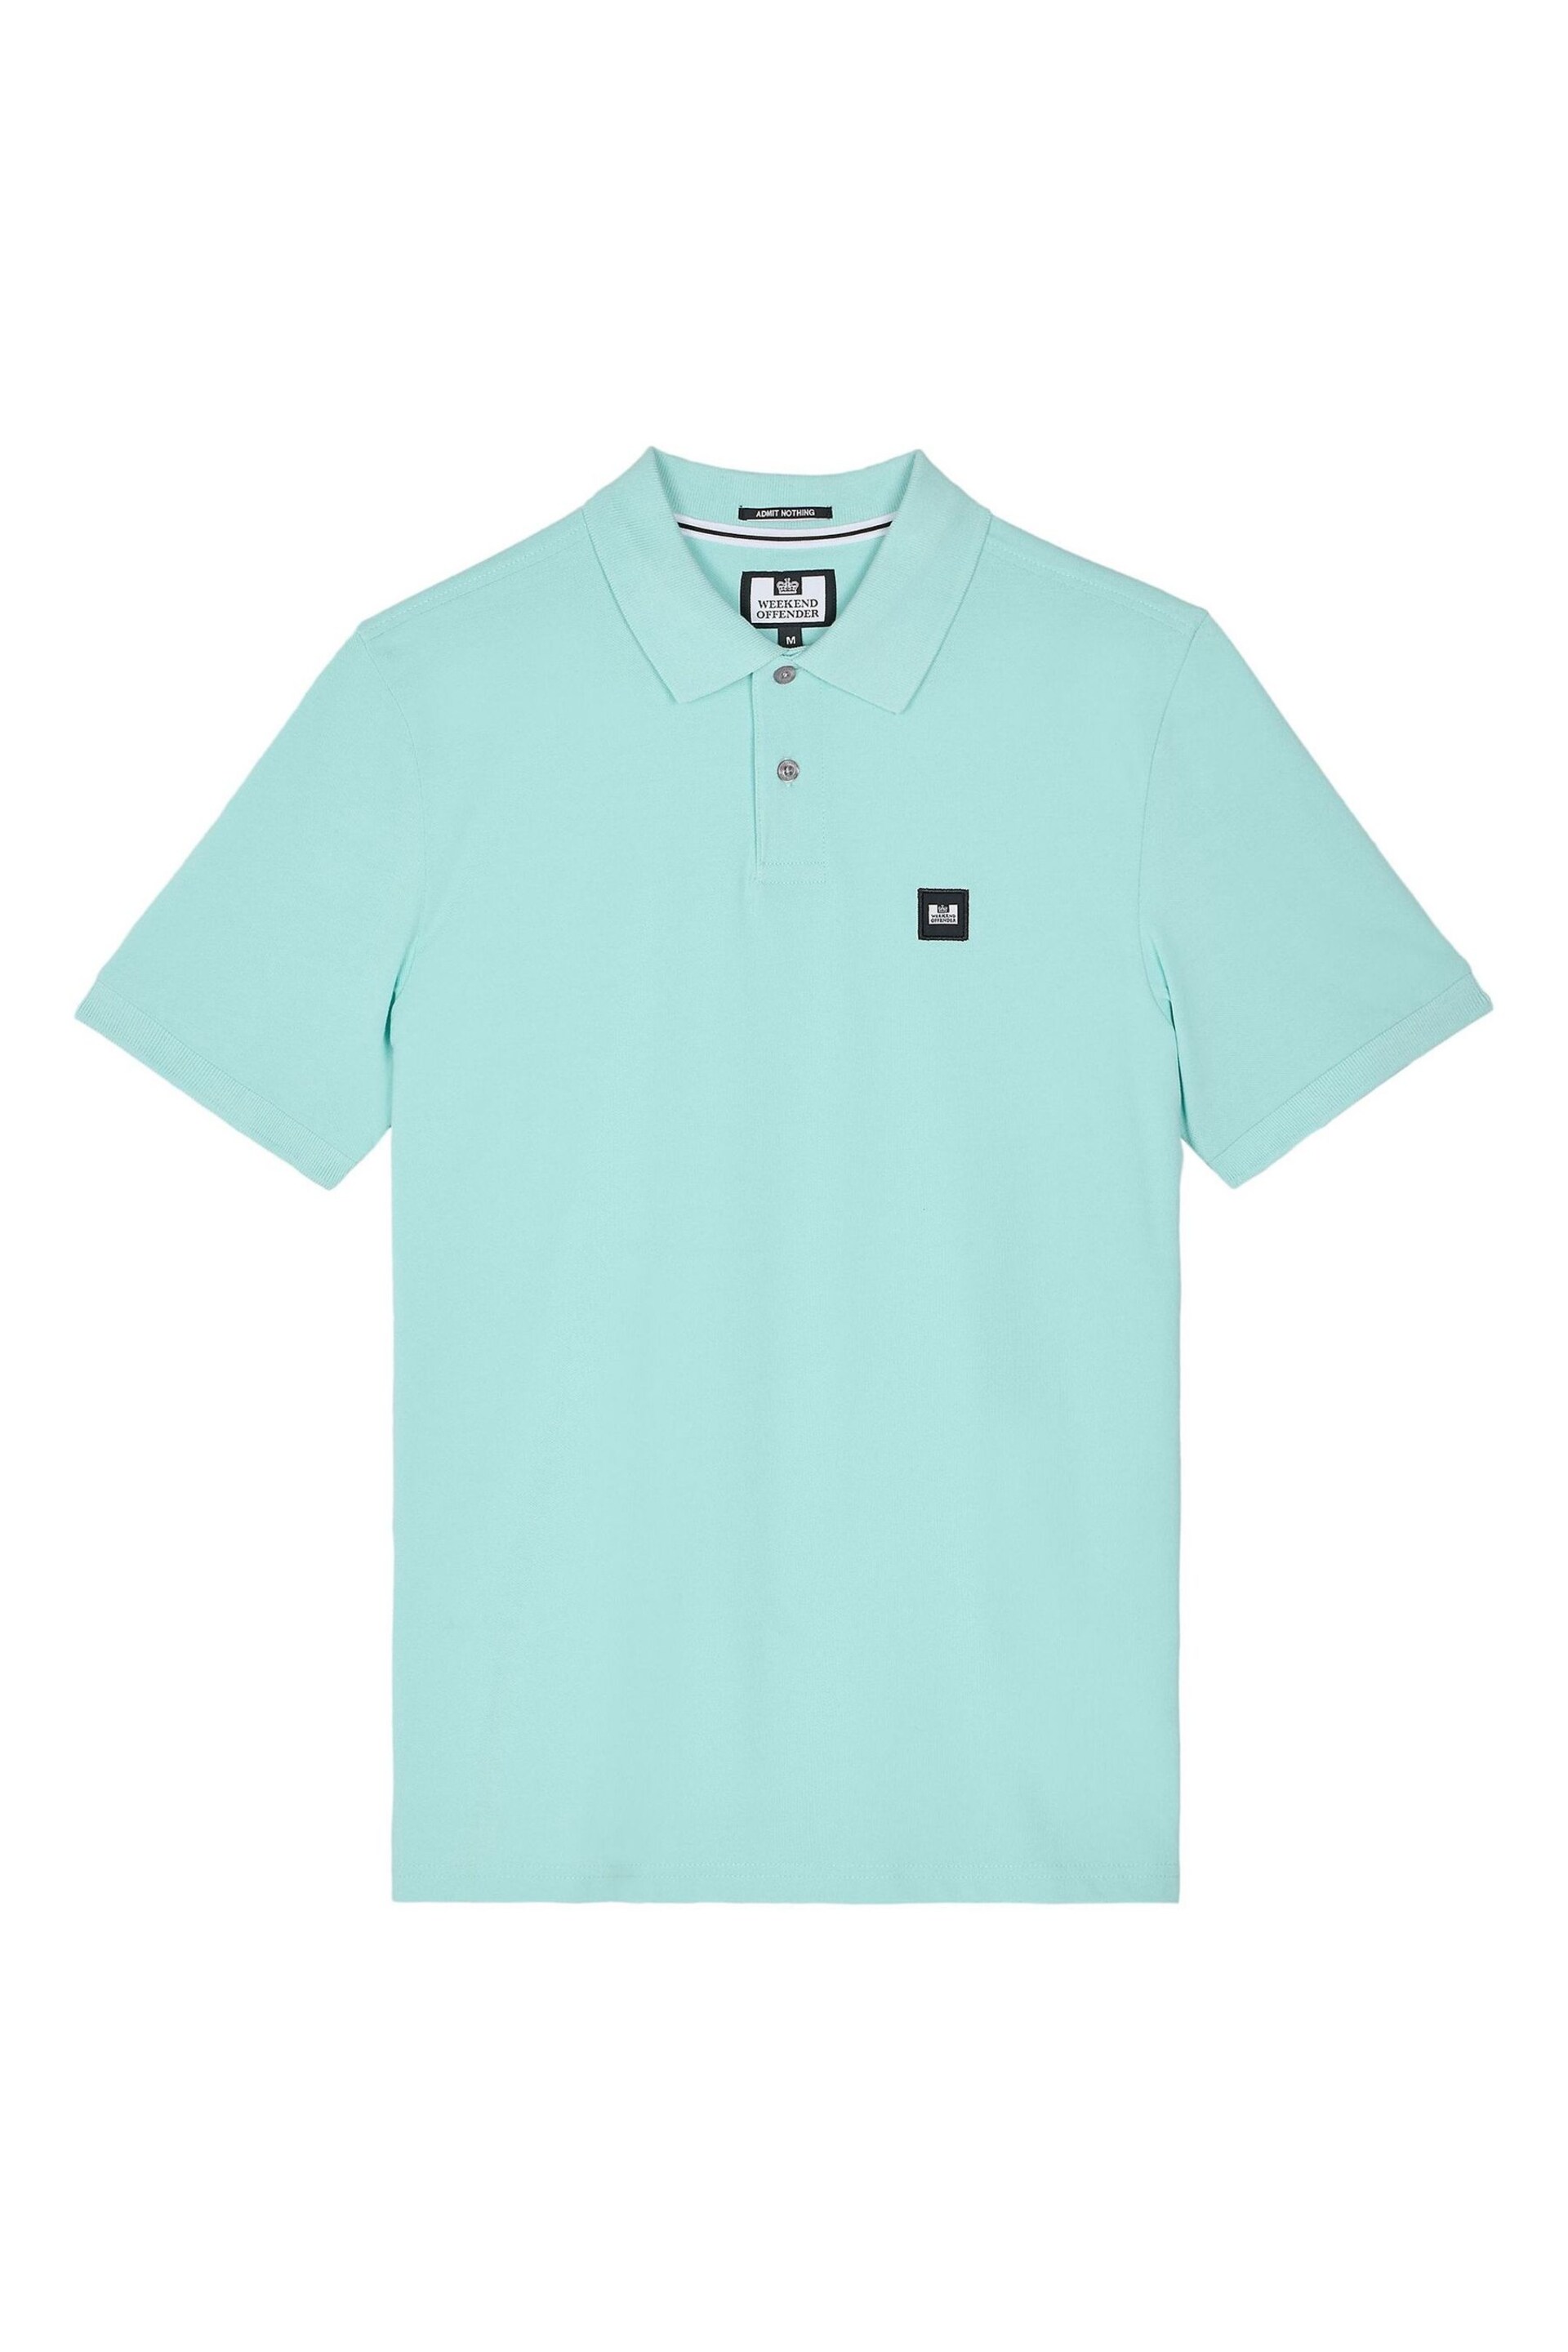 Weekend Offender Mens Caneiros Classic Badge Polo Shirt - Image 4 of 5